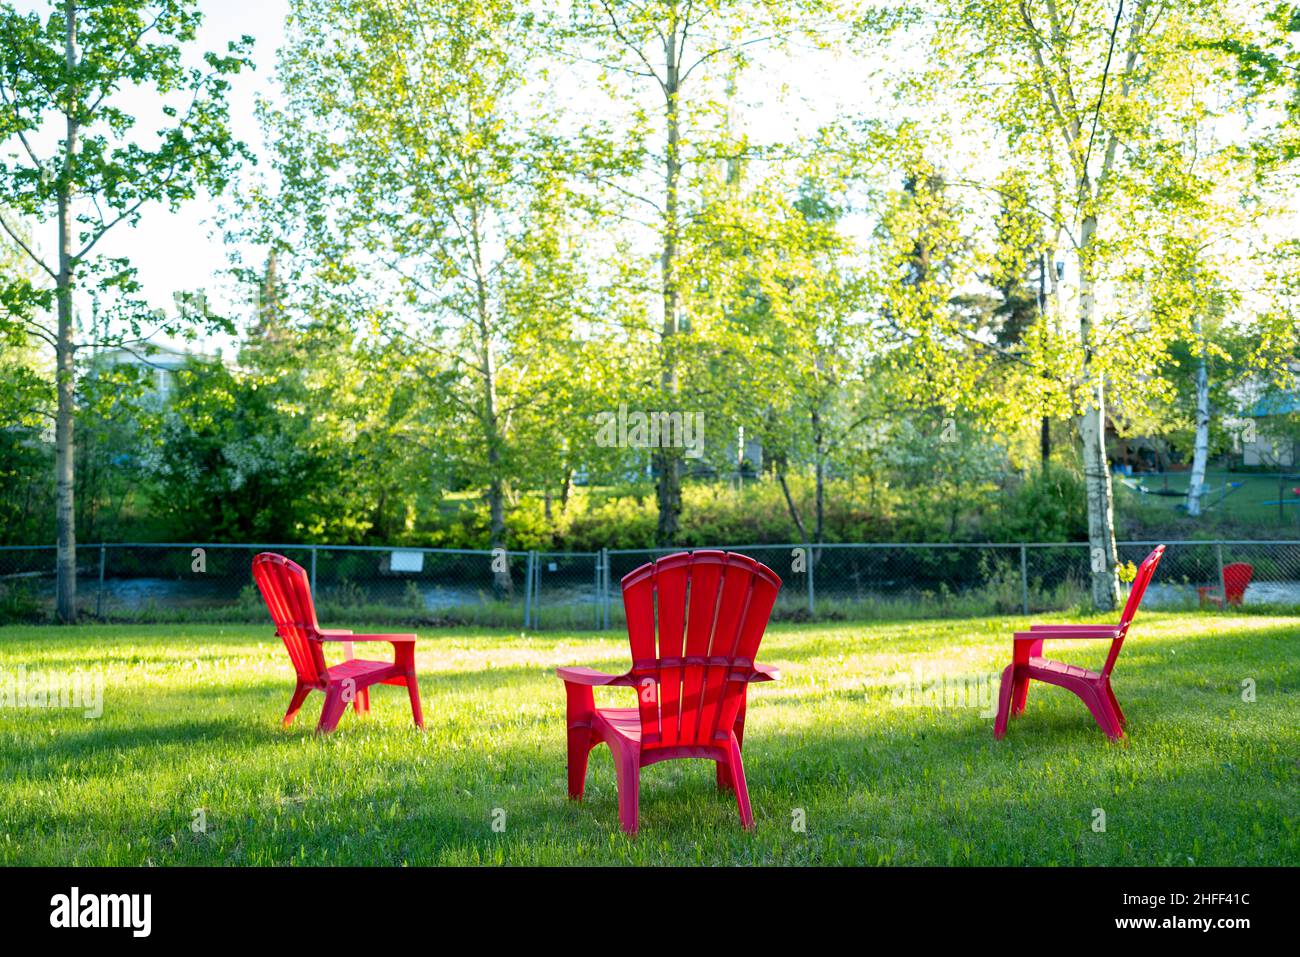 Social distancing in the backyard. Stock Photo